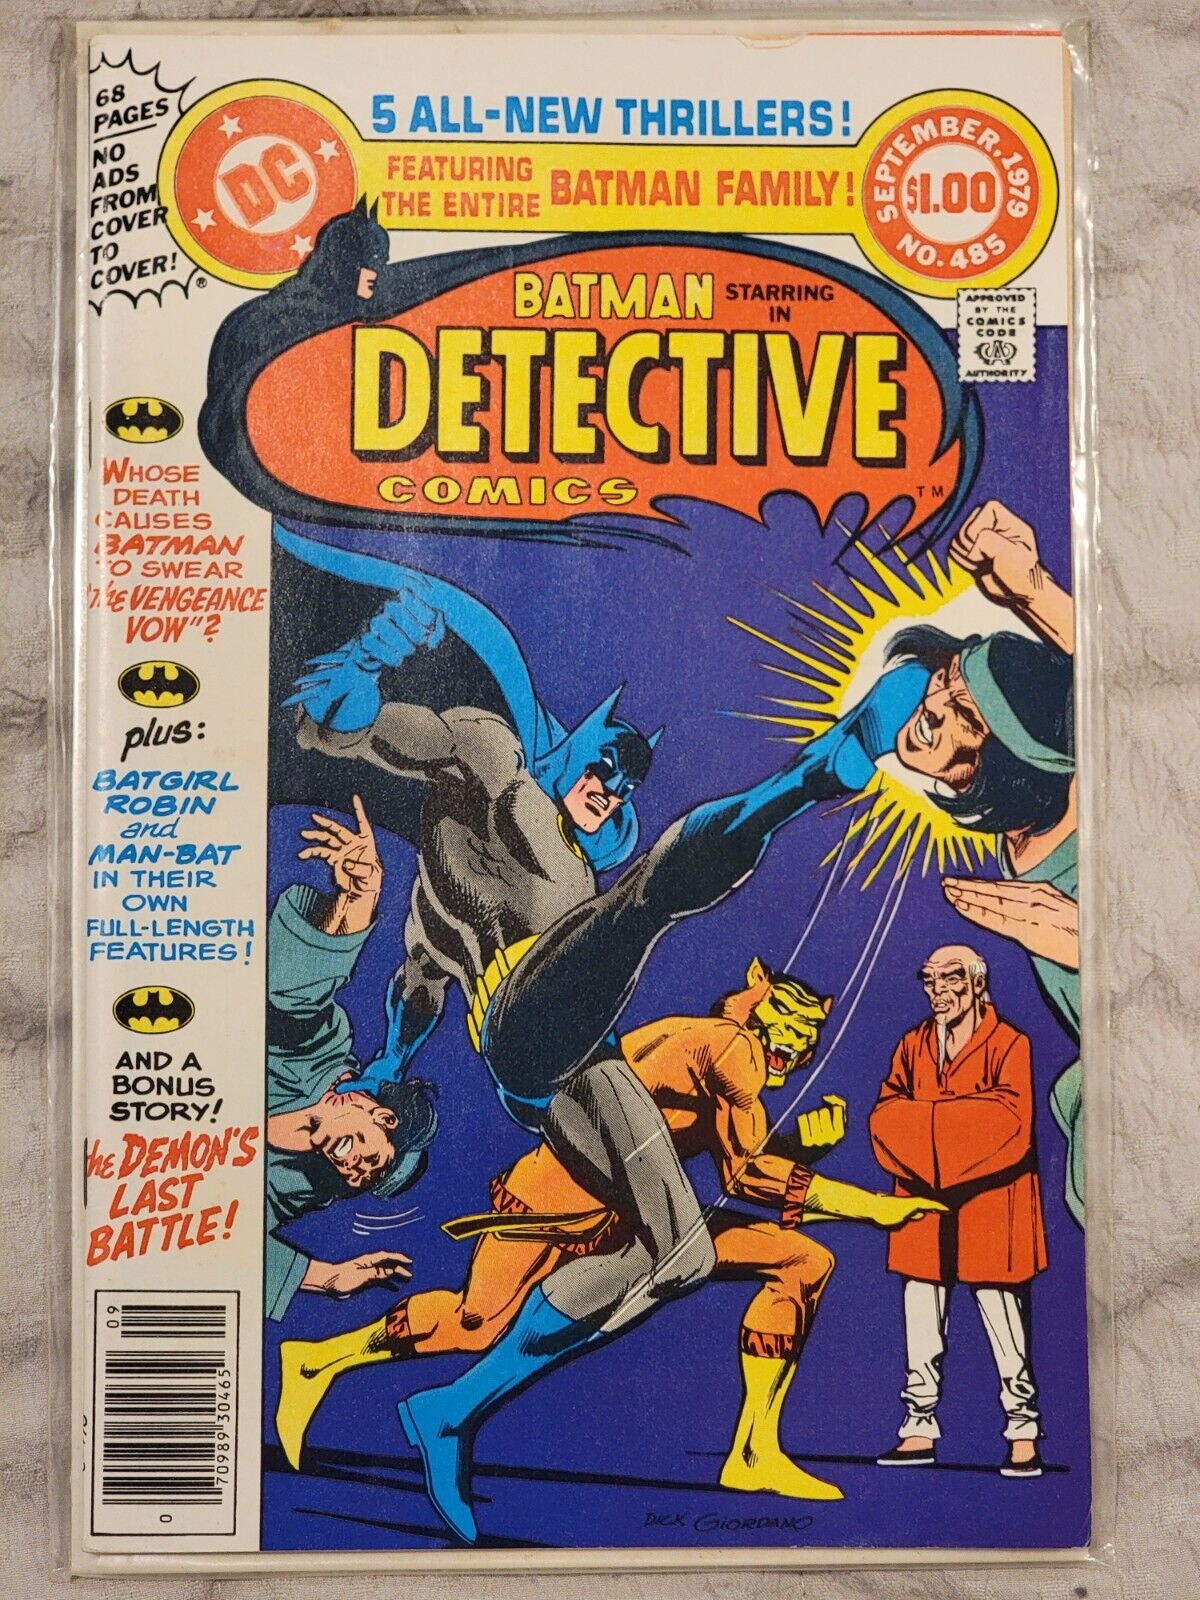 Detective Comics #485 (1979), Nice Grade Very Fine VF (8.0), High Res Scans